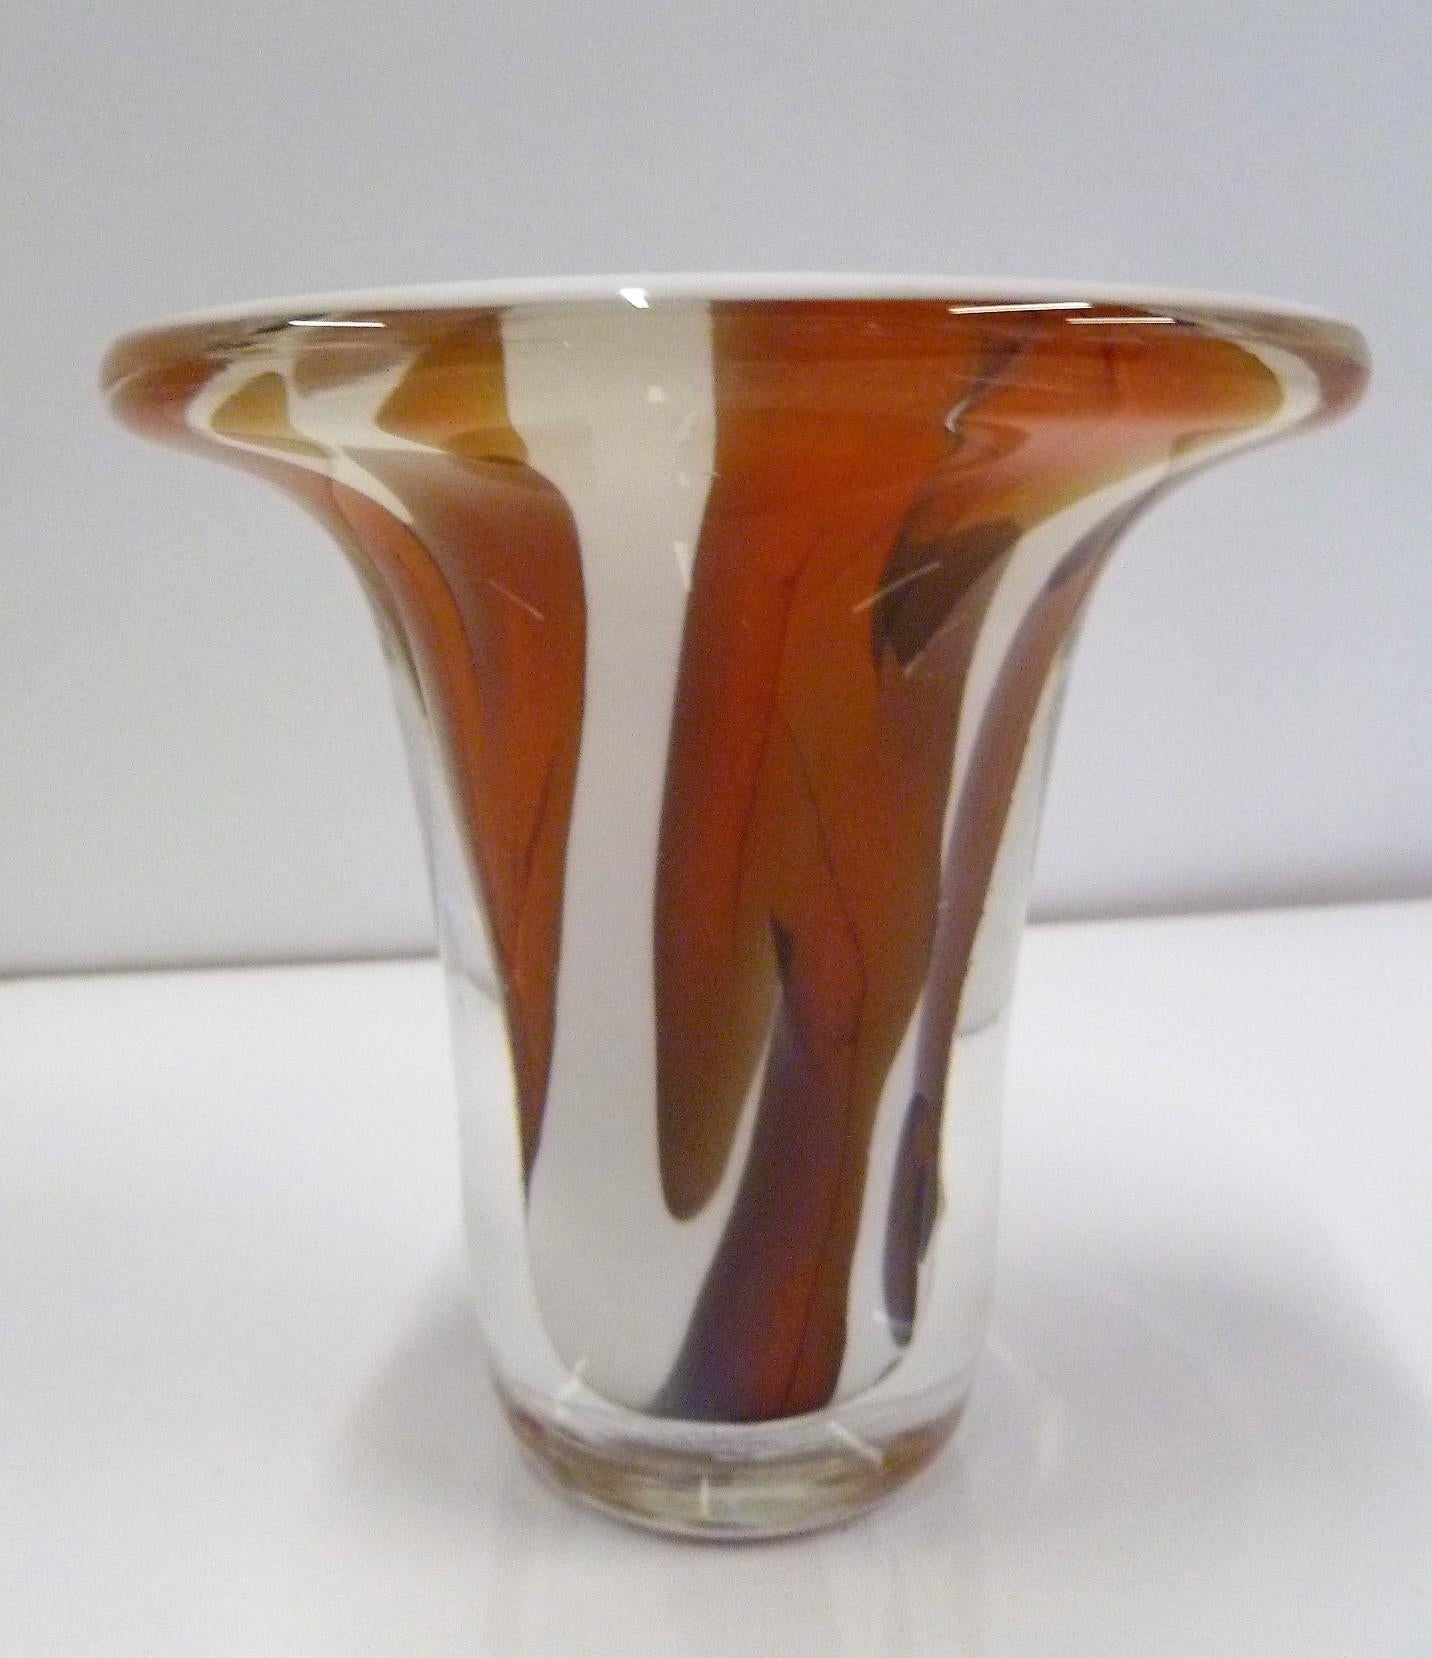 REDUCED FROM $300....Nanny Still (McKinney) for Studio Glass Val Saint Lambert in 1993, a flared vase vessel. Thick walled blown cased glass with dark carrot colored inclusions. Unique studio piece.
Signed in the glass: NS 66 1993 Studio Val
With